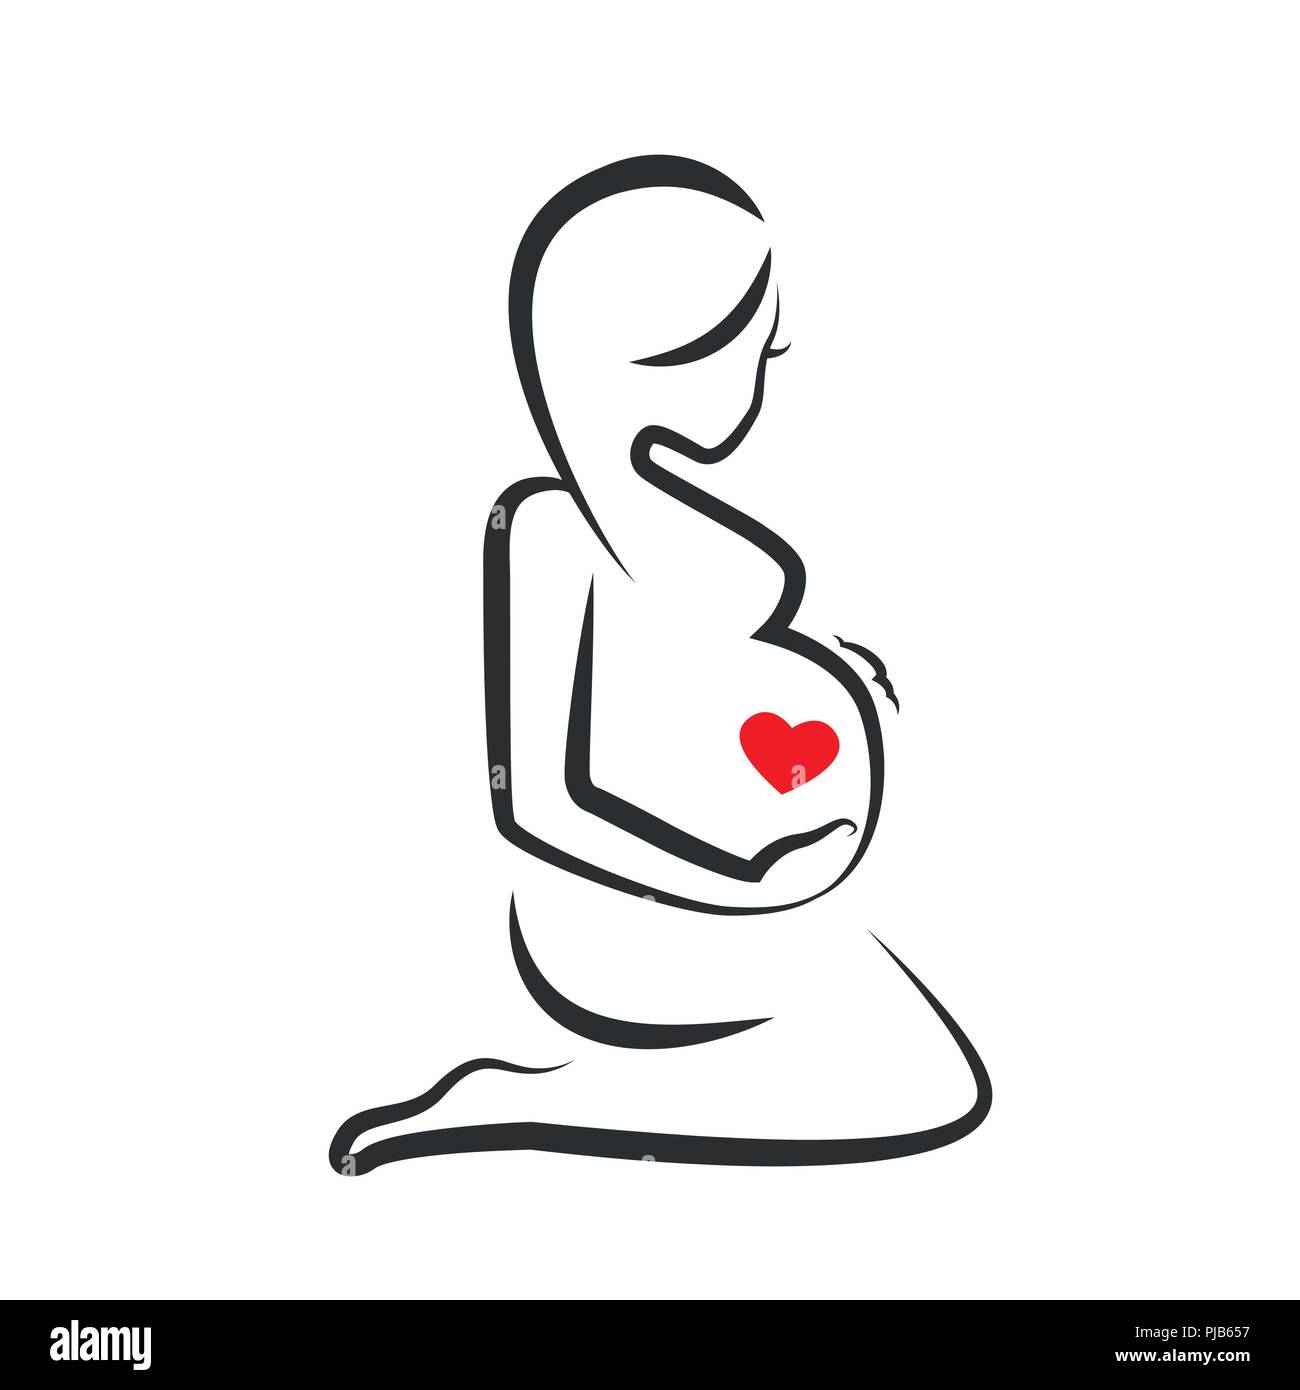 Pregnant Mother Drawing Images - The image is smaller on the paper, and